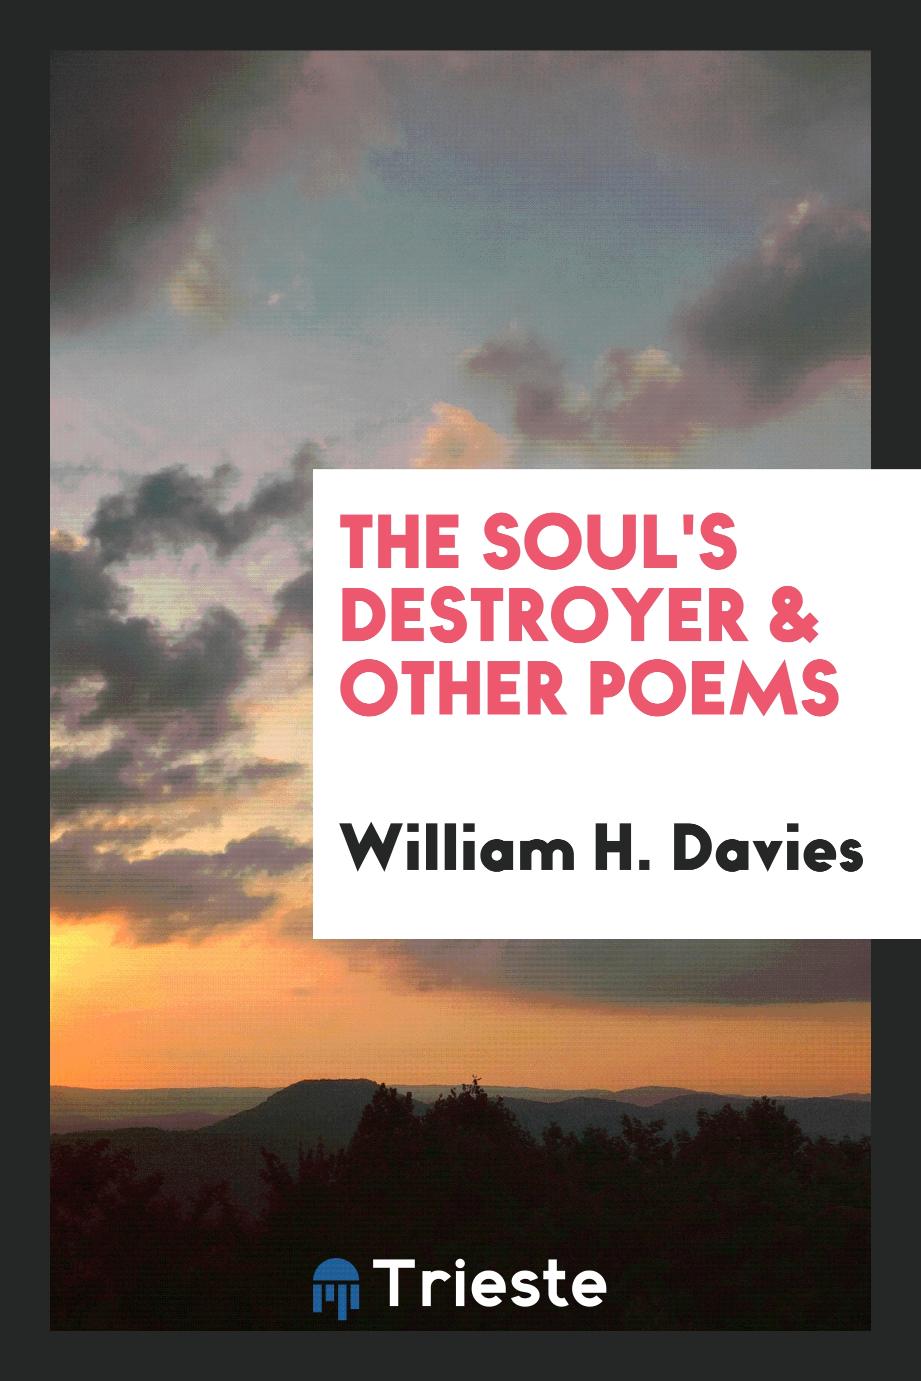 The Soul's Destroyer & Other Poems